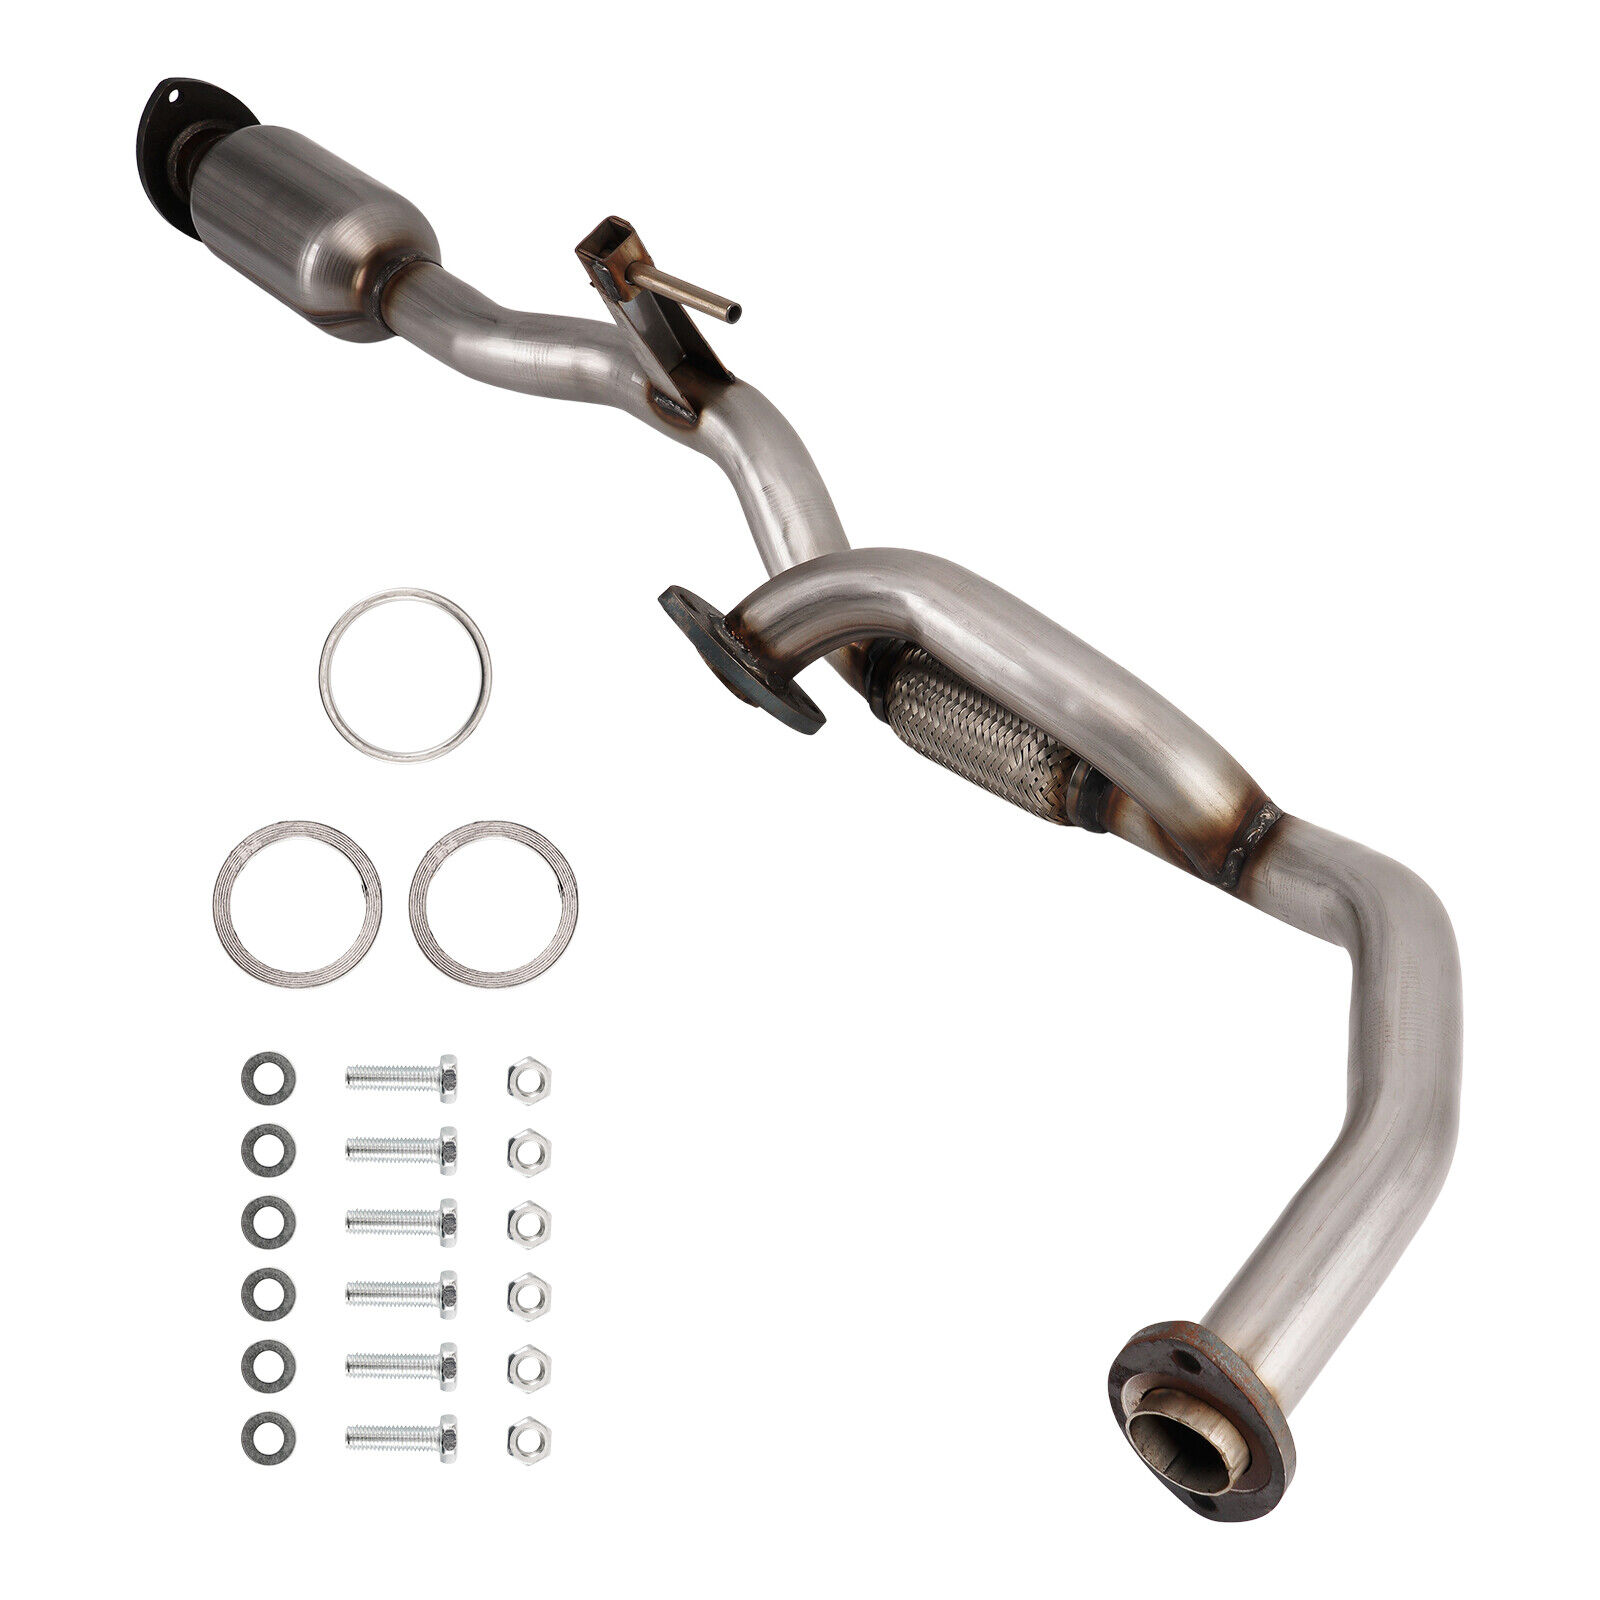  Front Exhaust Pipe w/ Catalytic Converter For 1999-03 Toyota Solara V6 3.0L 